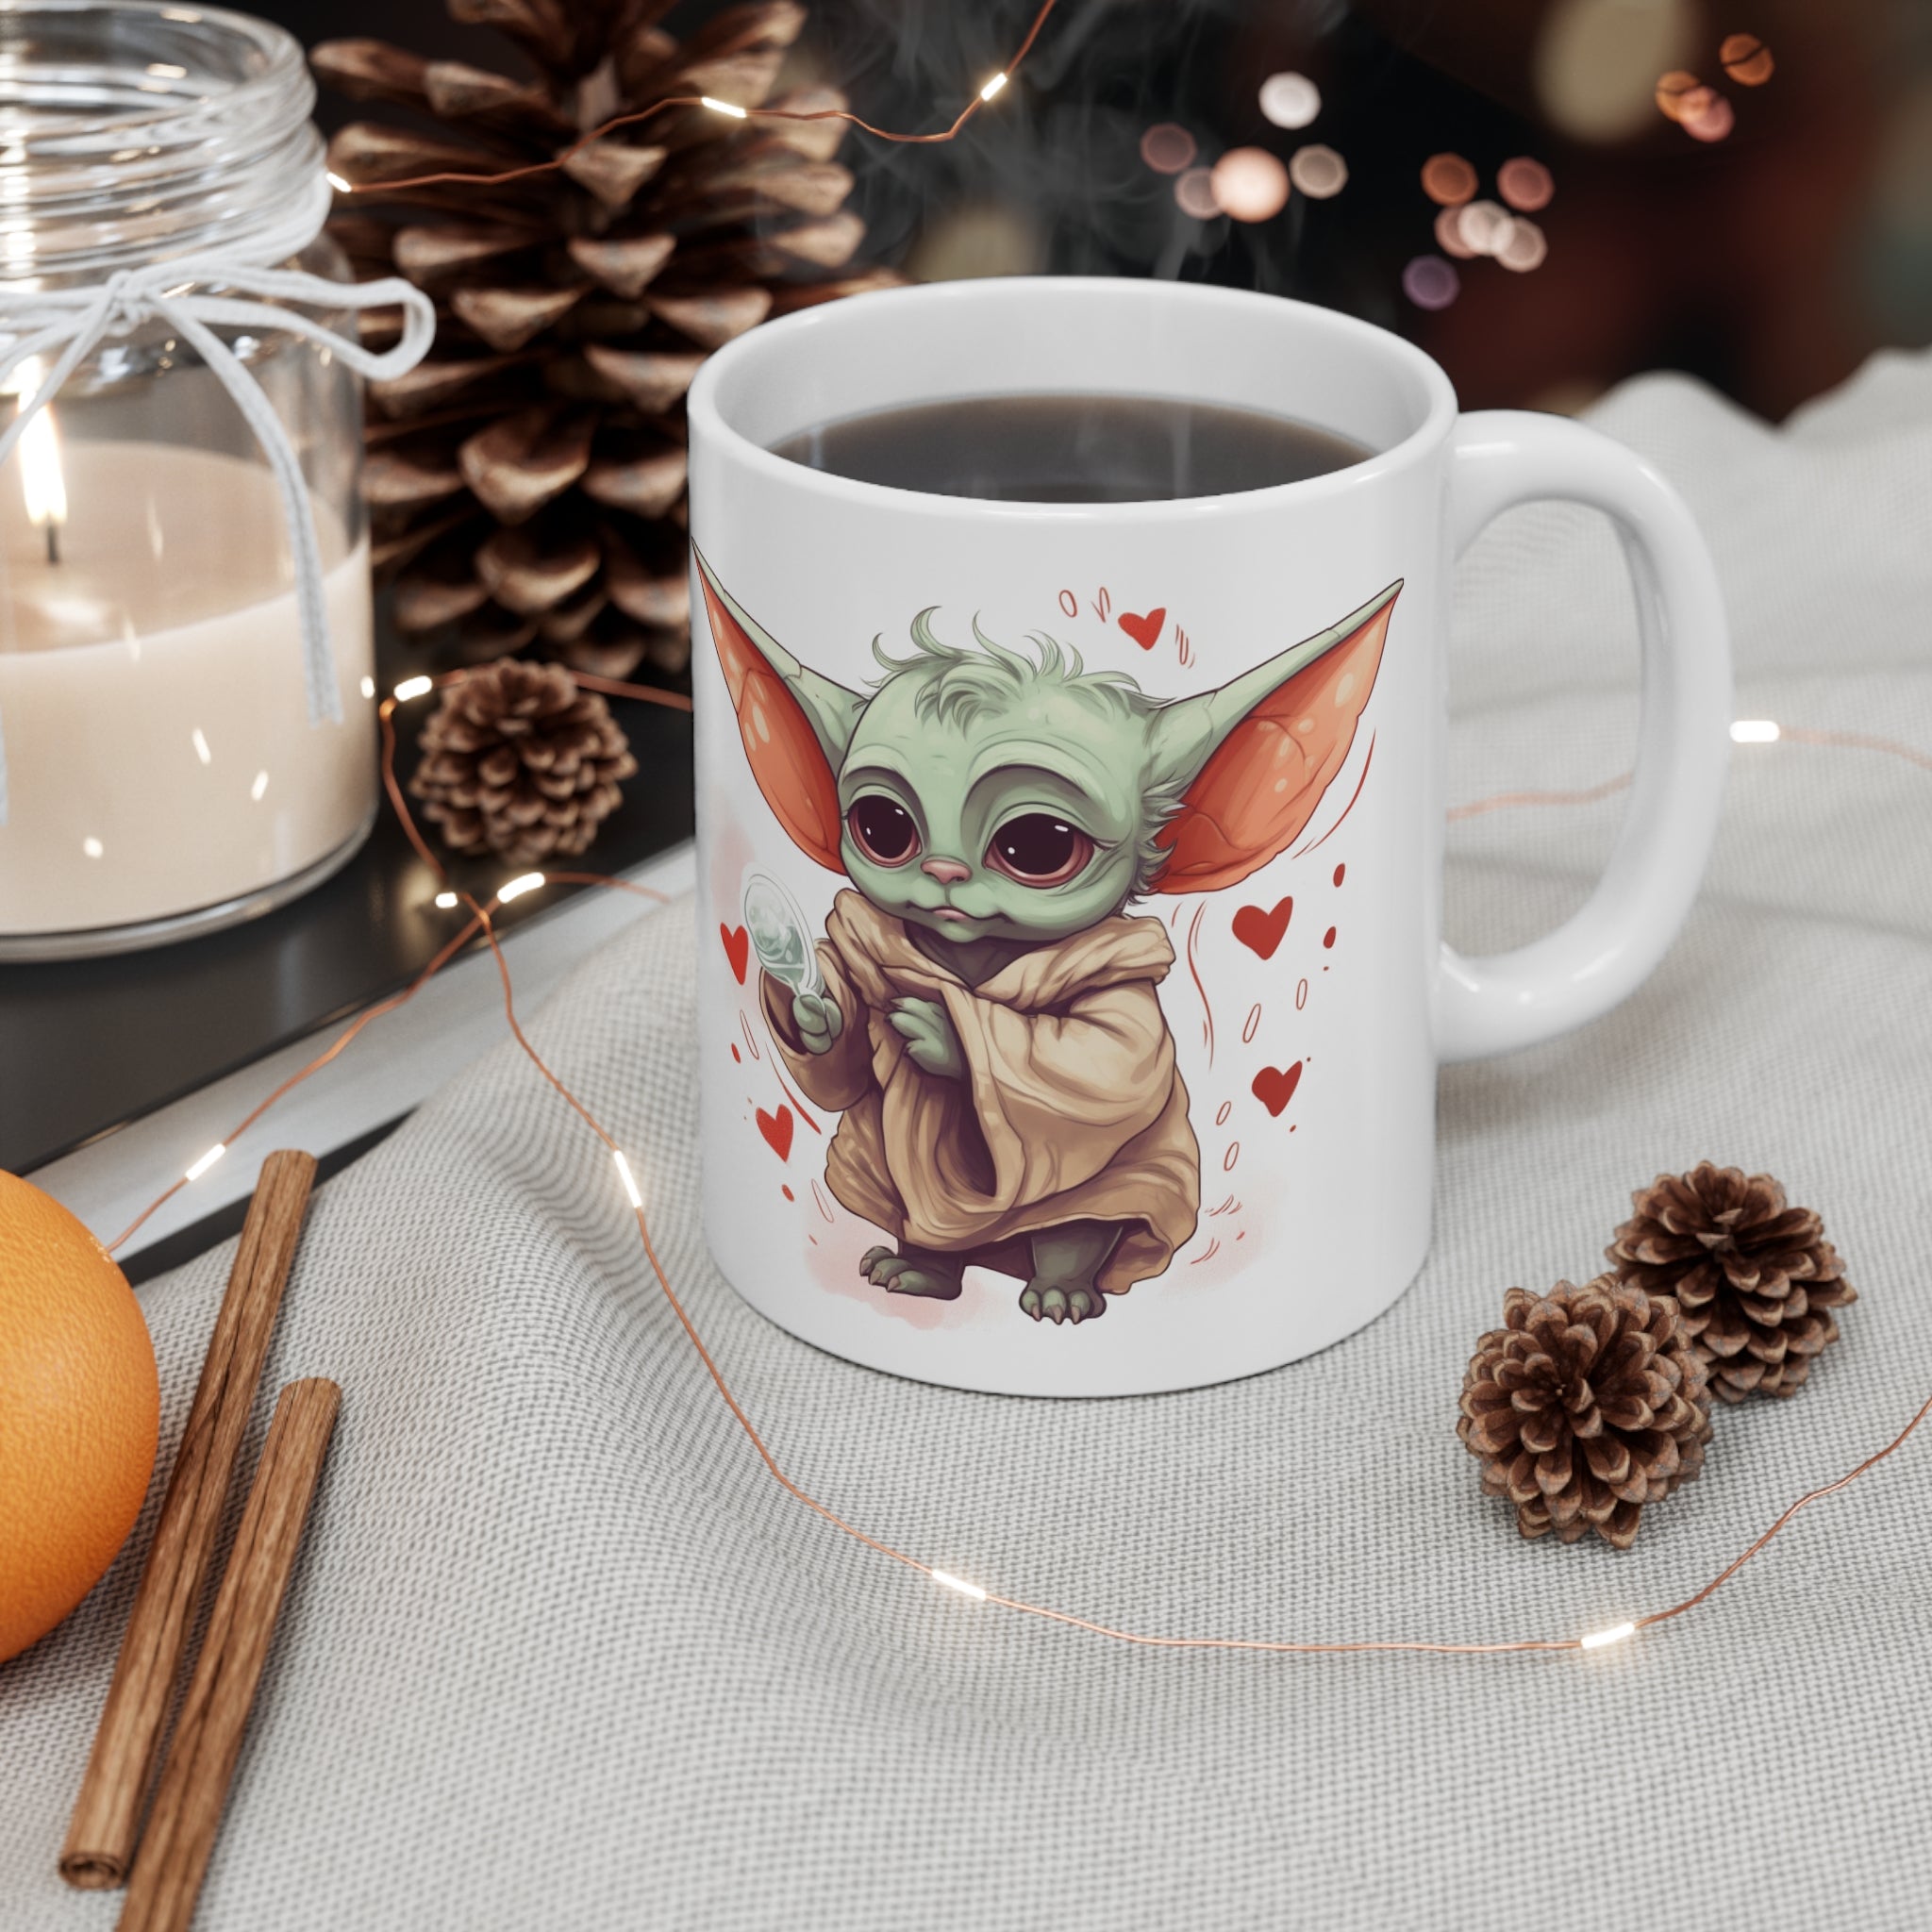 Pair With Original Trilogy Items to Make Your Theme Complete. Retro Galaxy Master Romantic Valentine's Day Cupid Ceramic Mug 11oz - Unique Gift for the One You Love or for the Ideal Gift for Friends